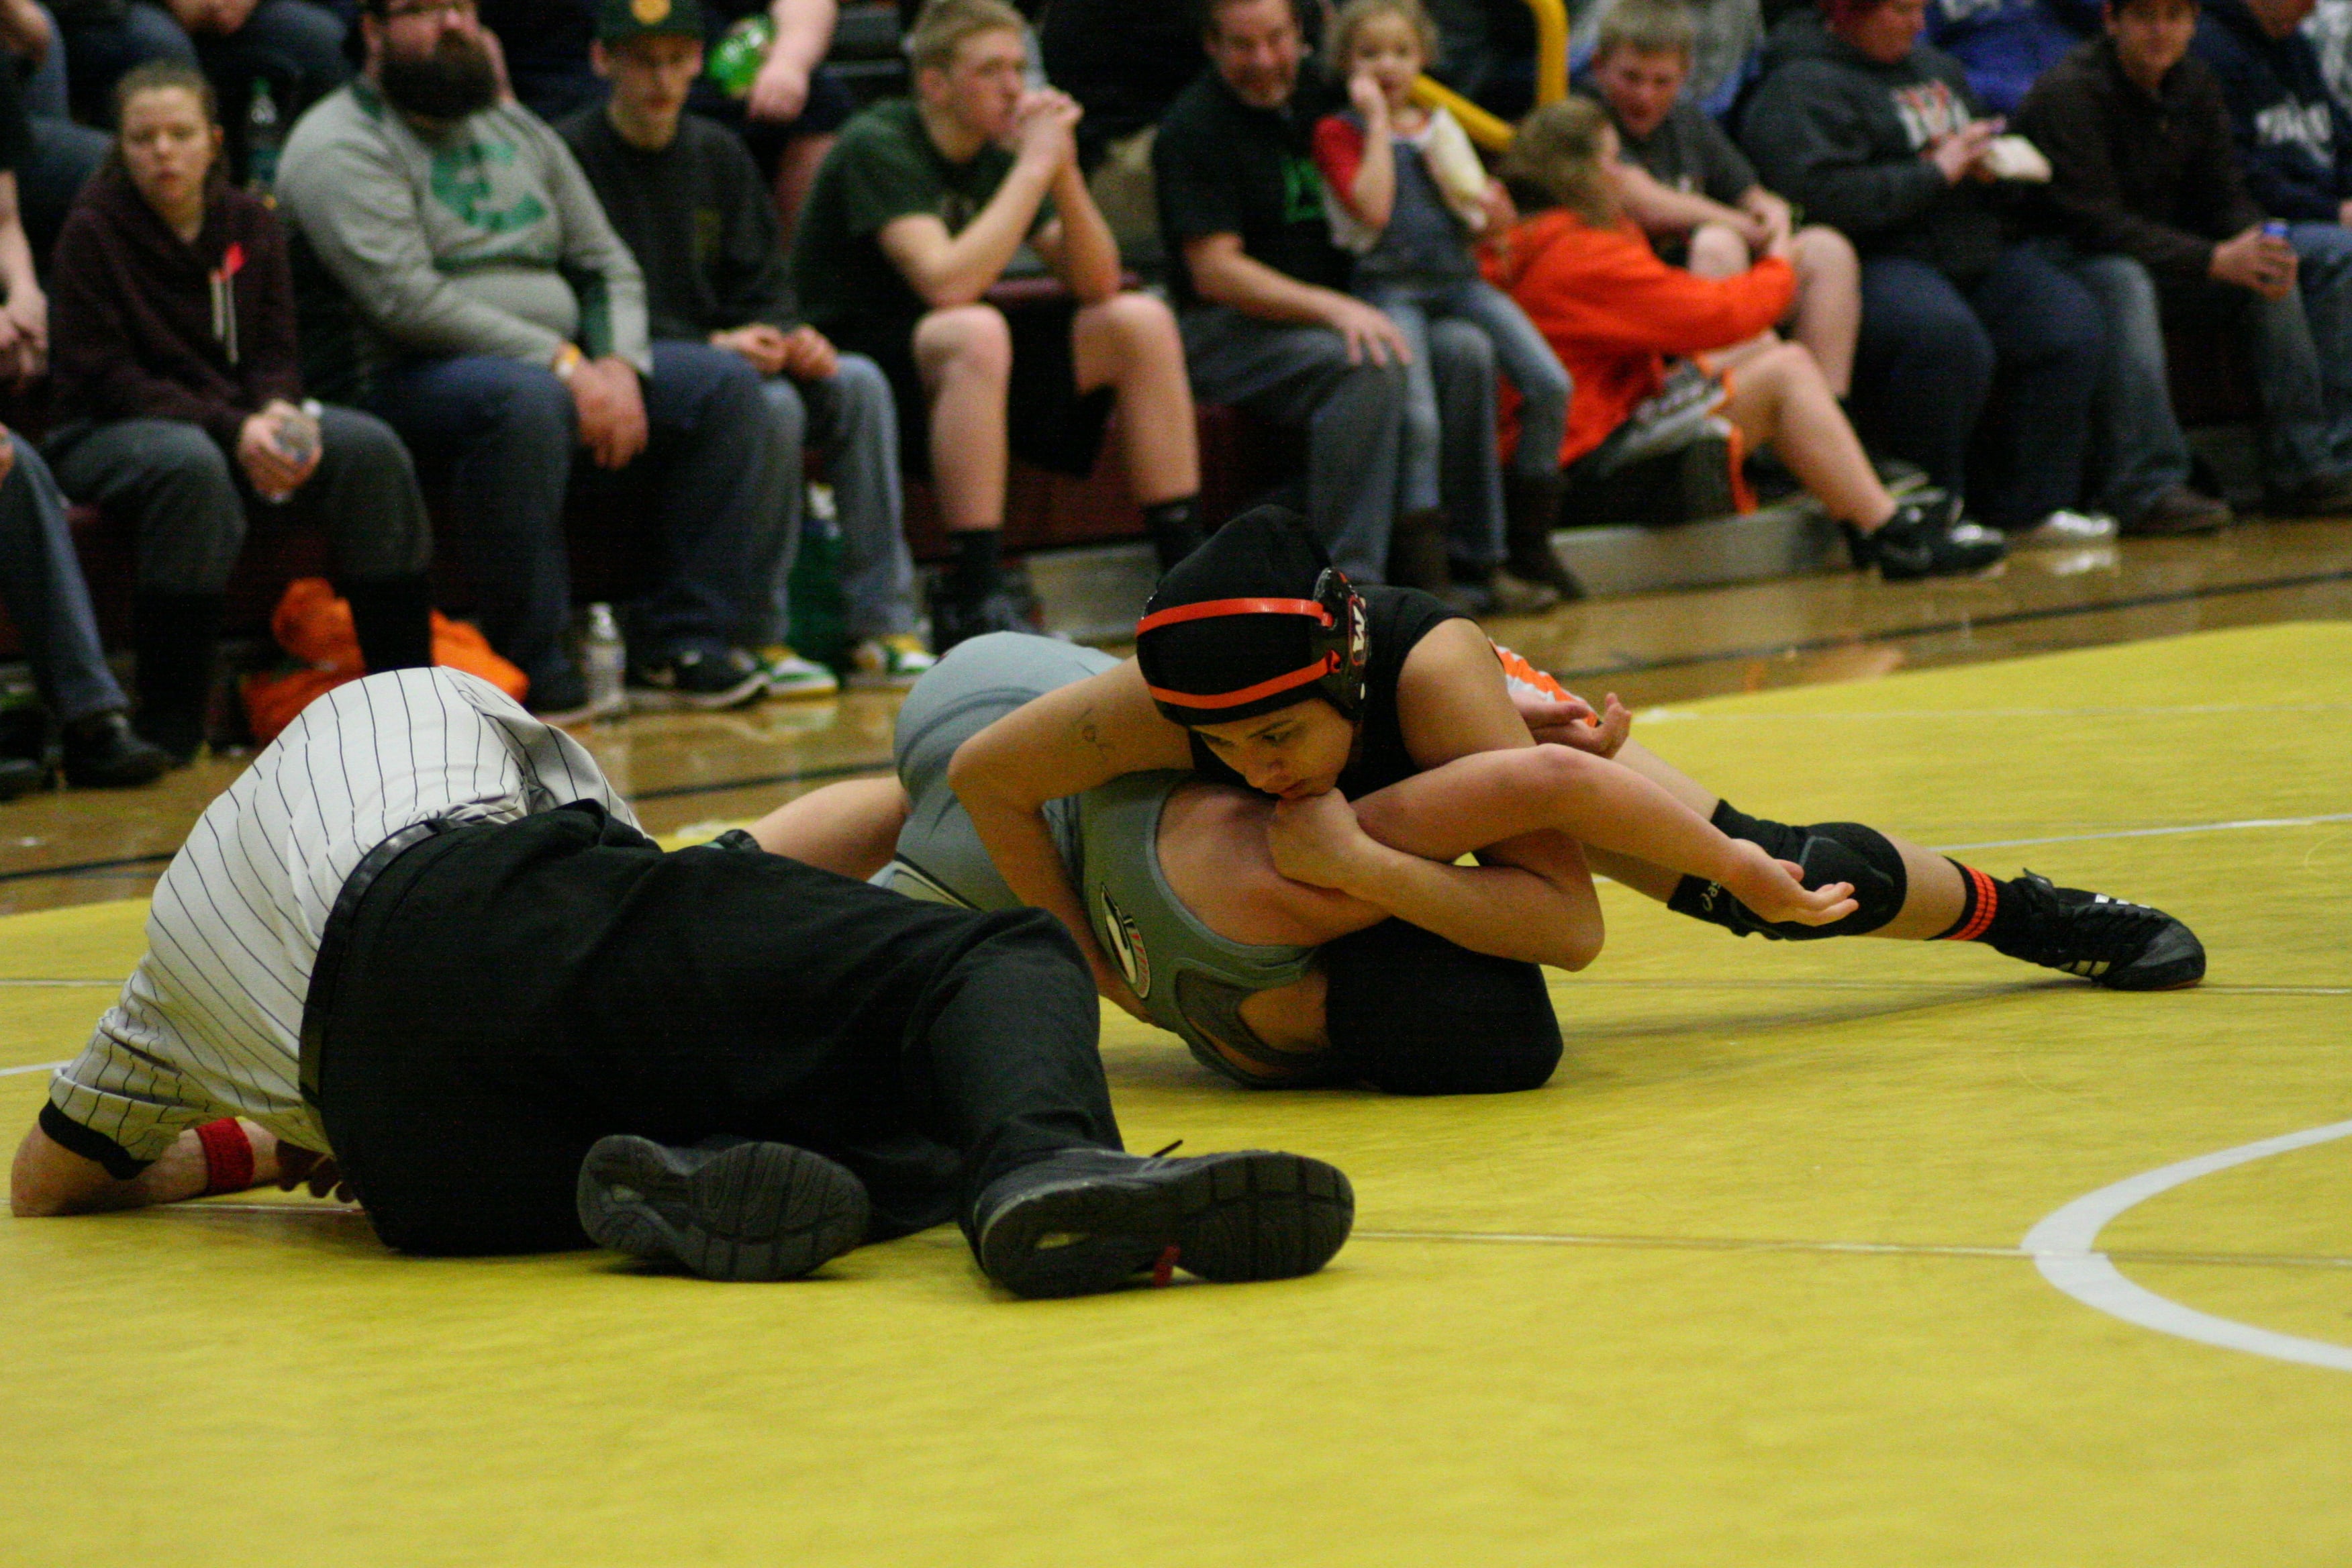 Yaneli Martinez pins her opponent for the 105-pound county title.